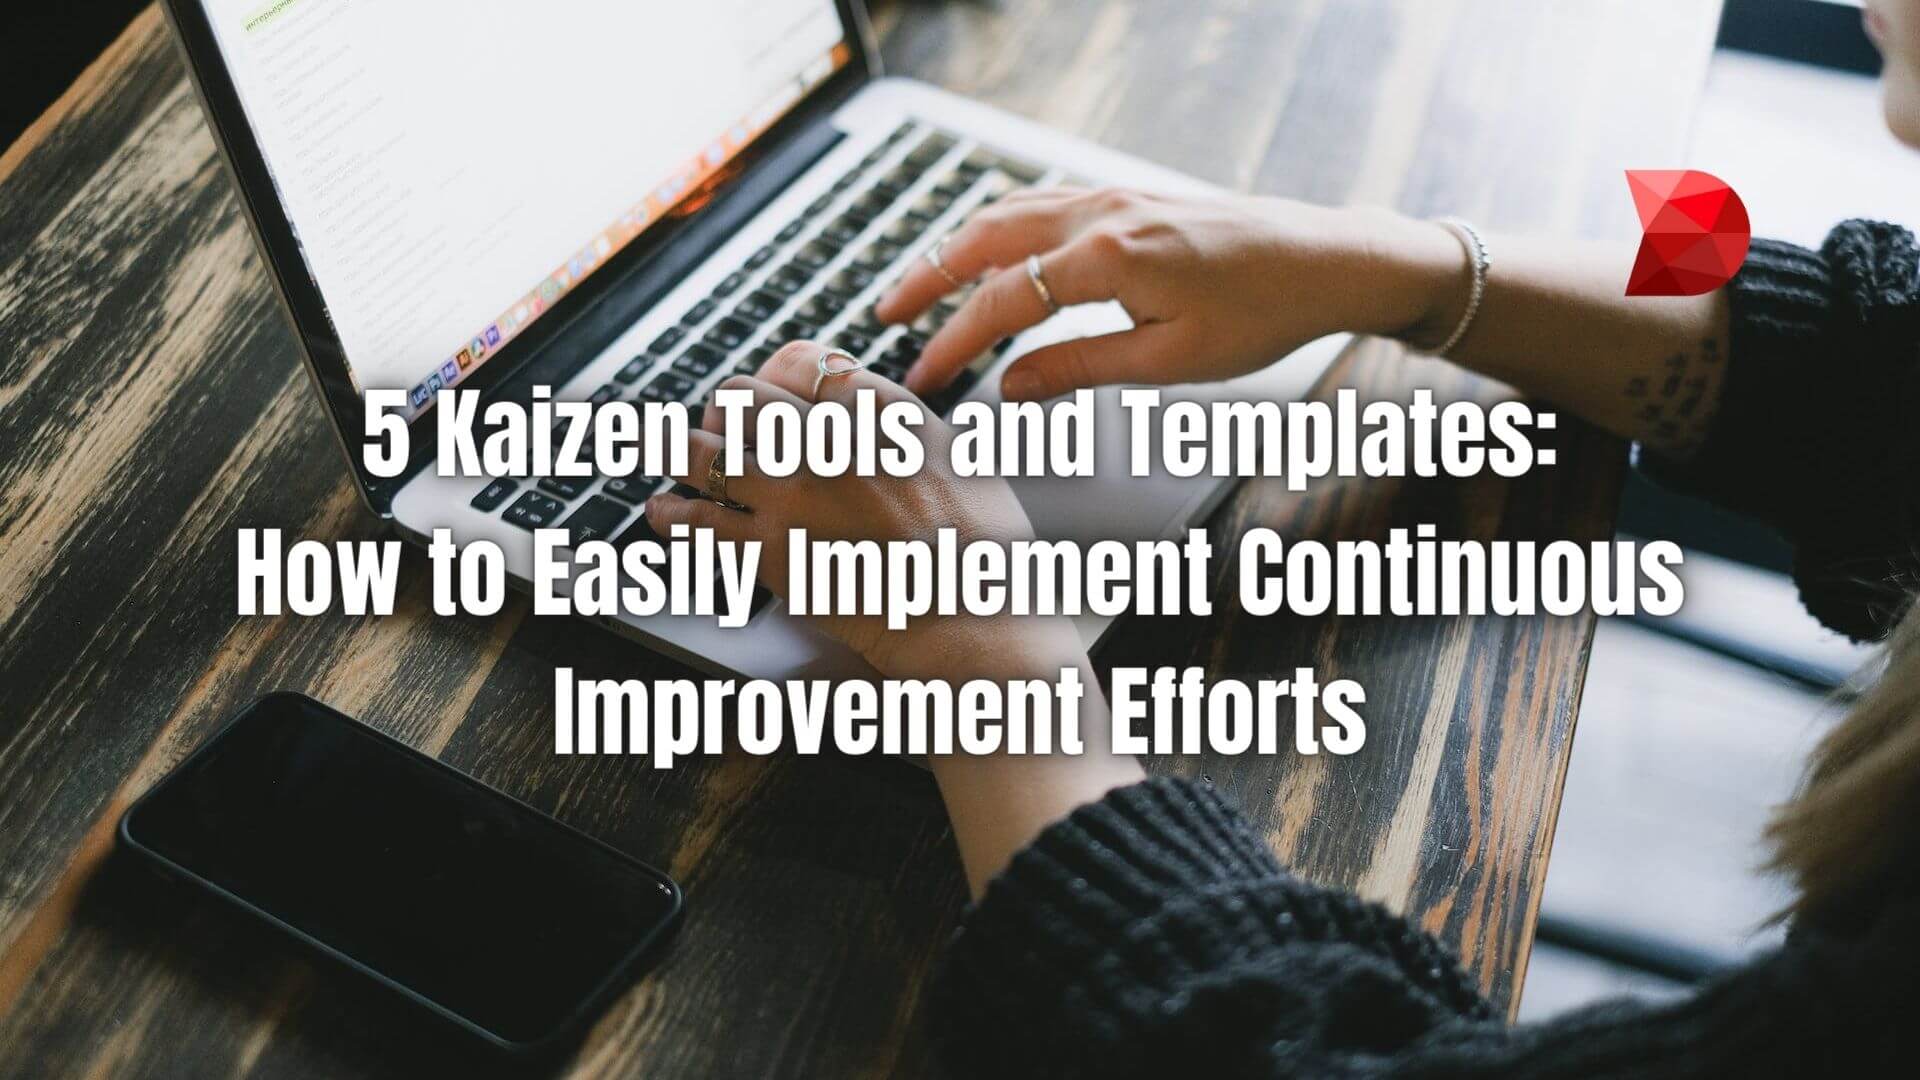 Effortlessly implement continuous improvement! Click here to explore 5 Kaizen tools and templates in this comprehensive guide.